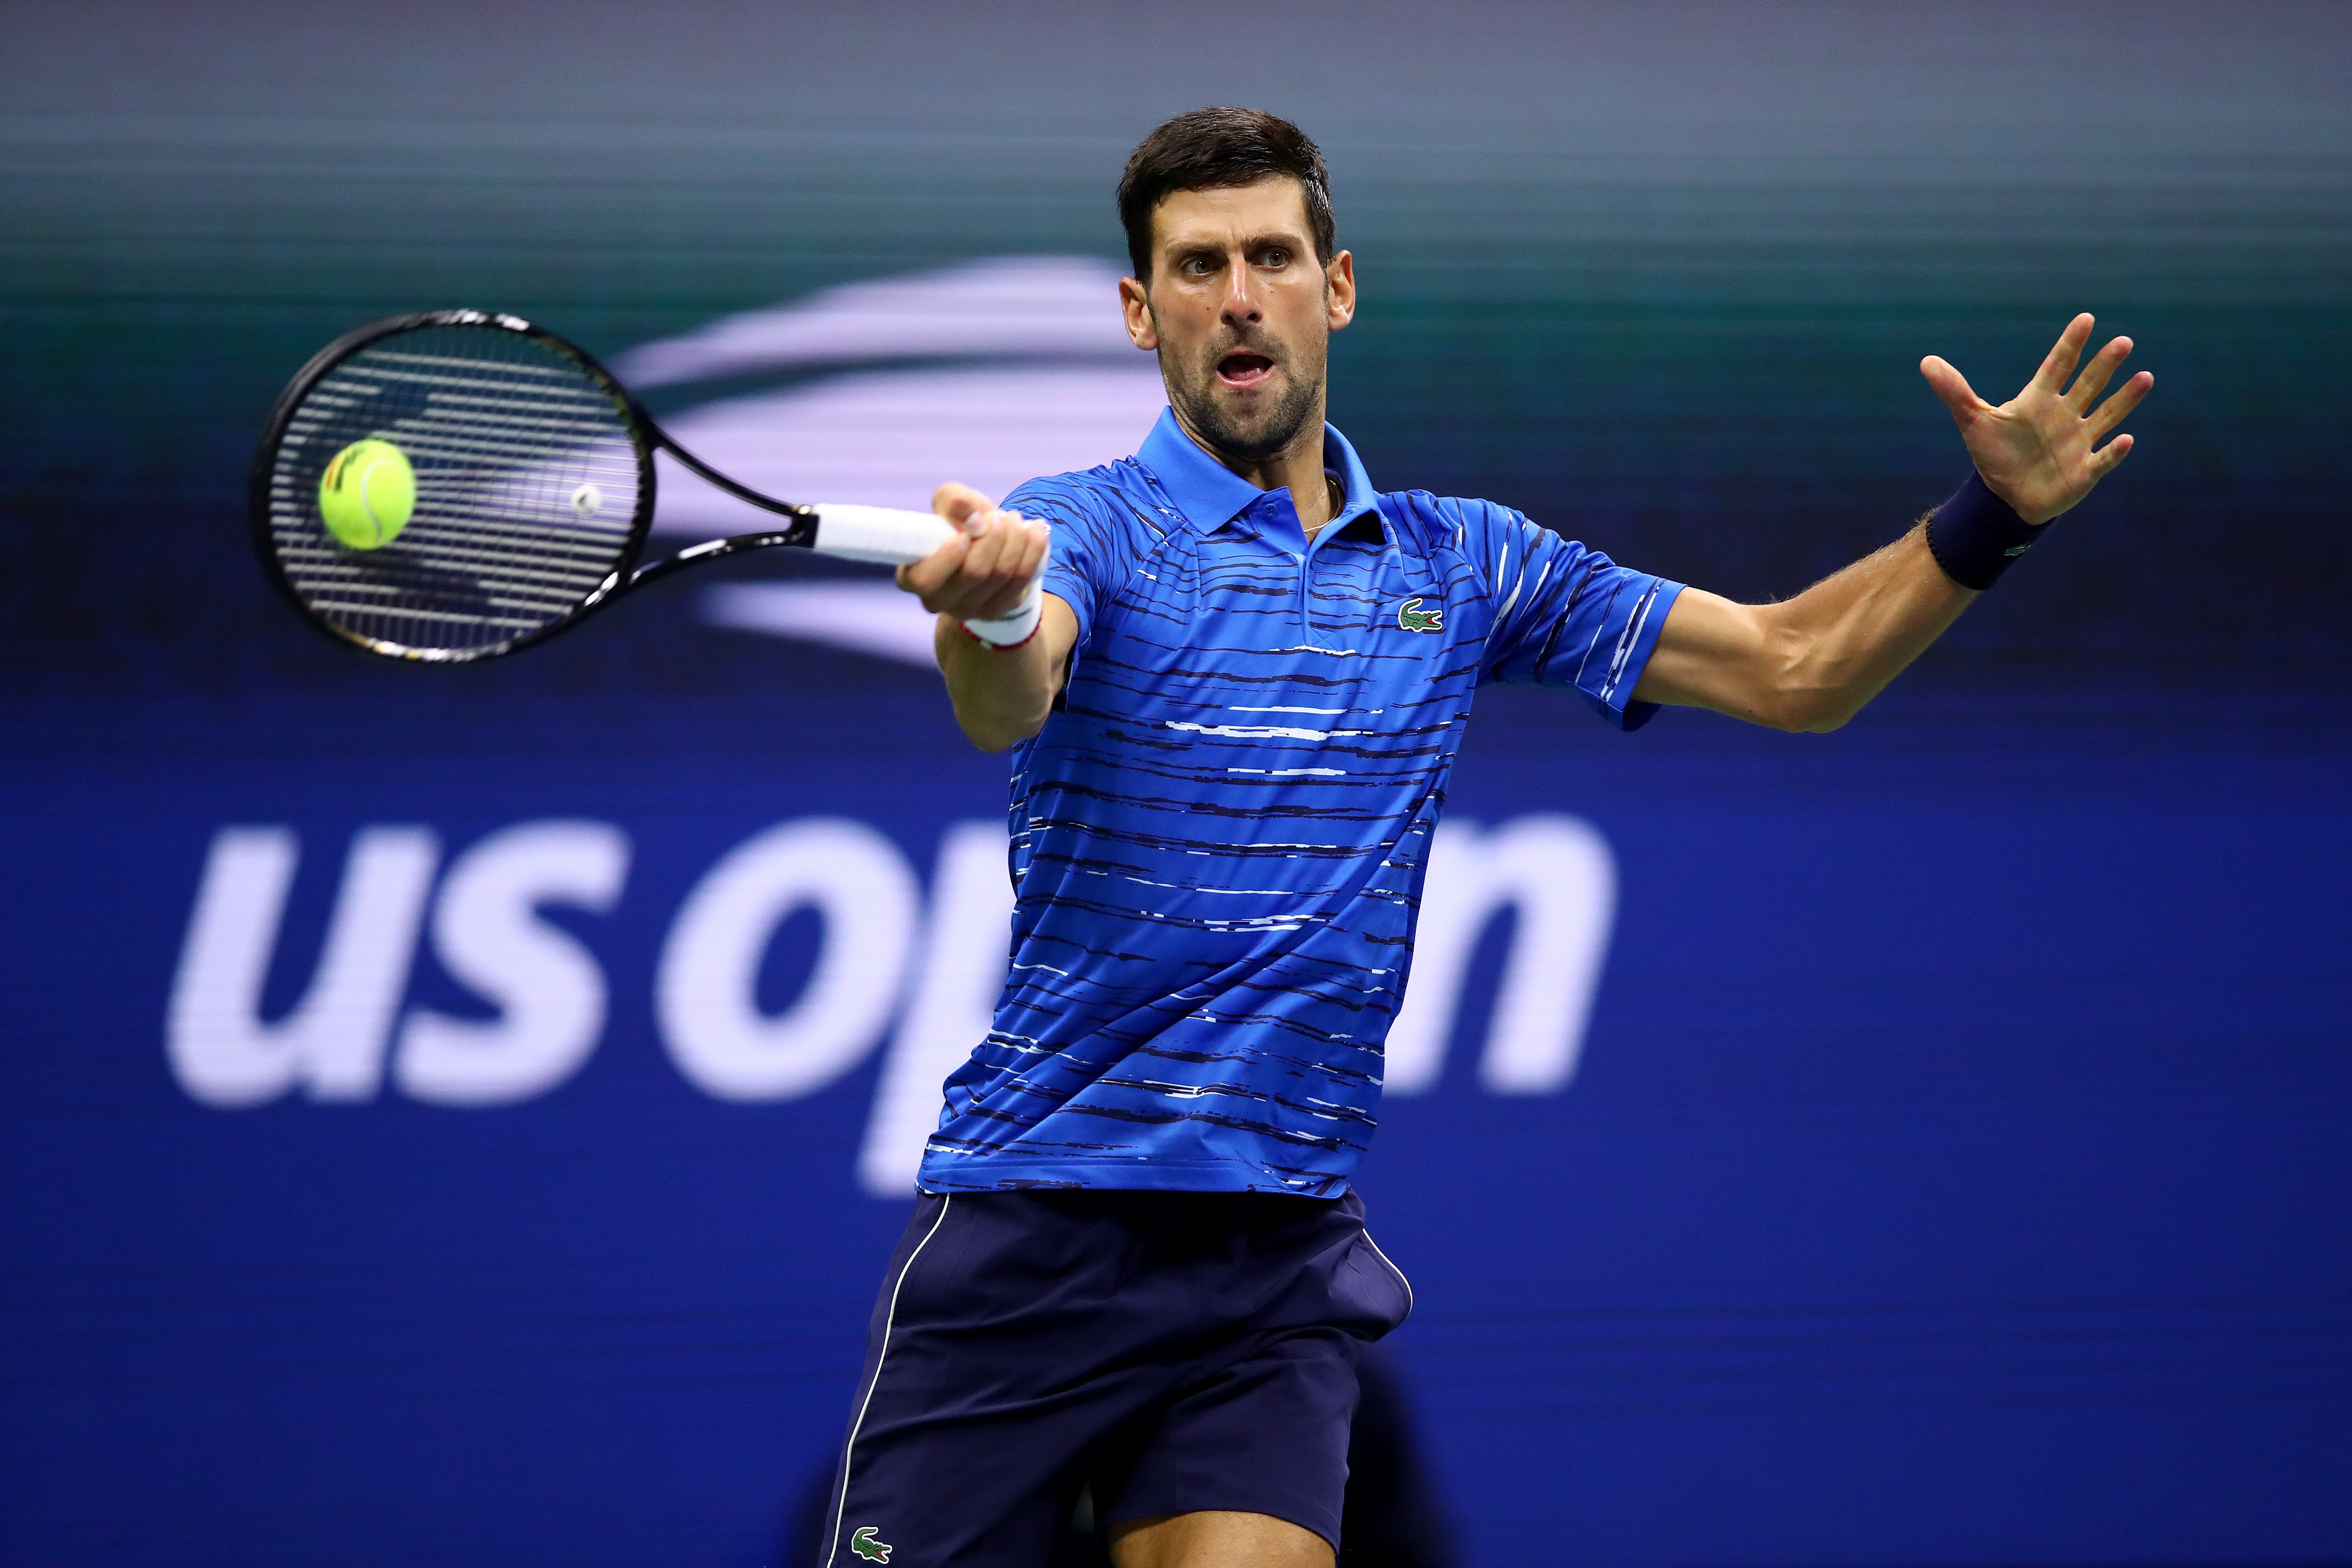 Novak Djokovic returns a shot during his Men's Singles second round match against Juan Ignacio Londero of Argentina on day three of the 2019 US Open. | Source: Getty Images.